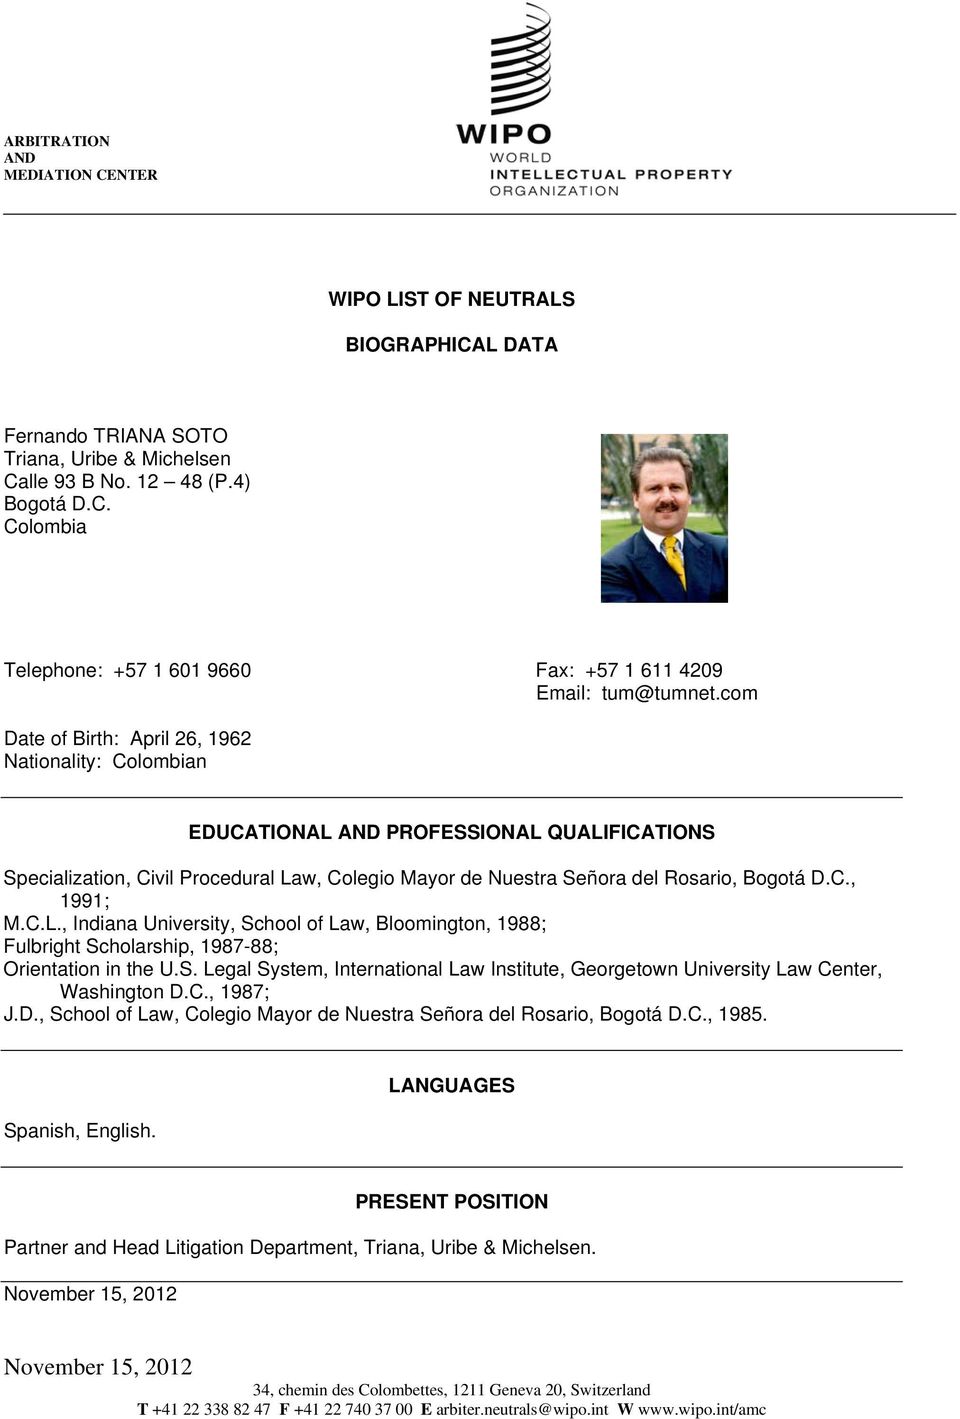 C.L., Indiana University, School of Law, Bloomington, 1988; Fulbright Scholarship, 1987-88; Orientation in the U.S. Legal System, International Law Institute, Georgetown University Law Center, Washington D.